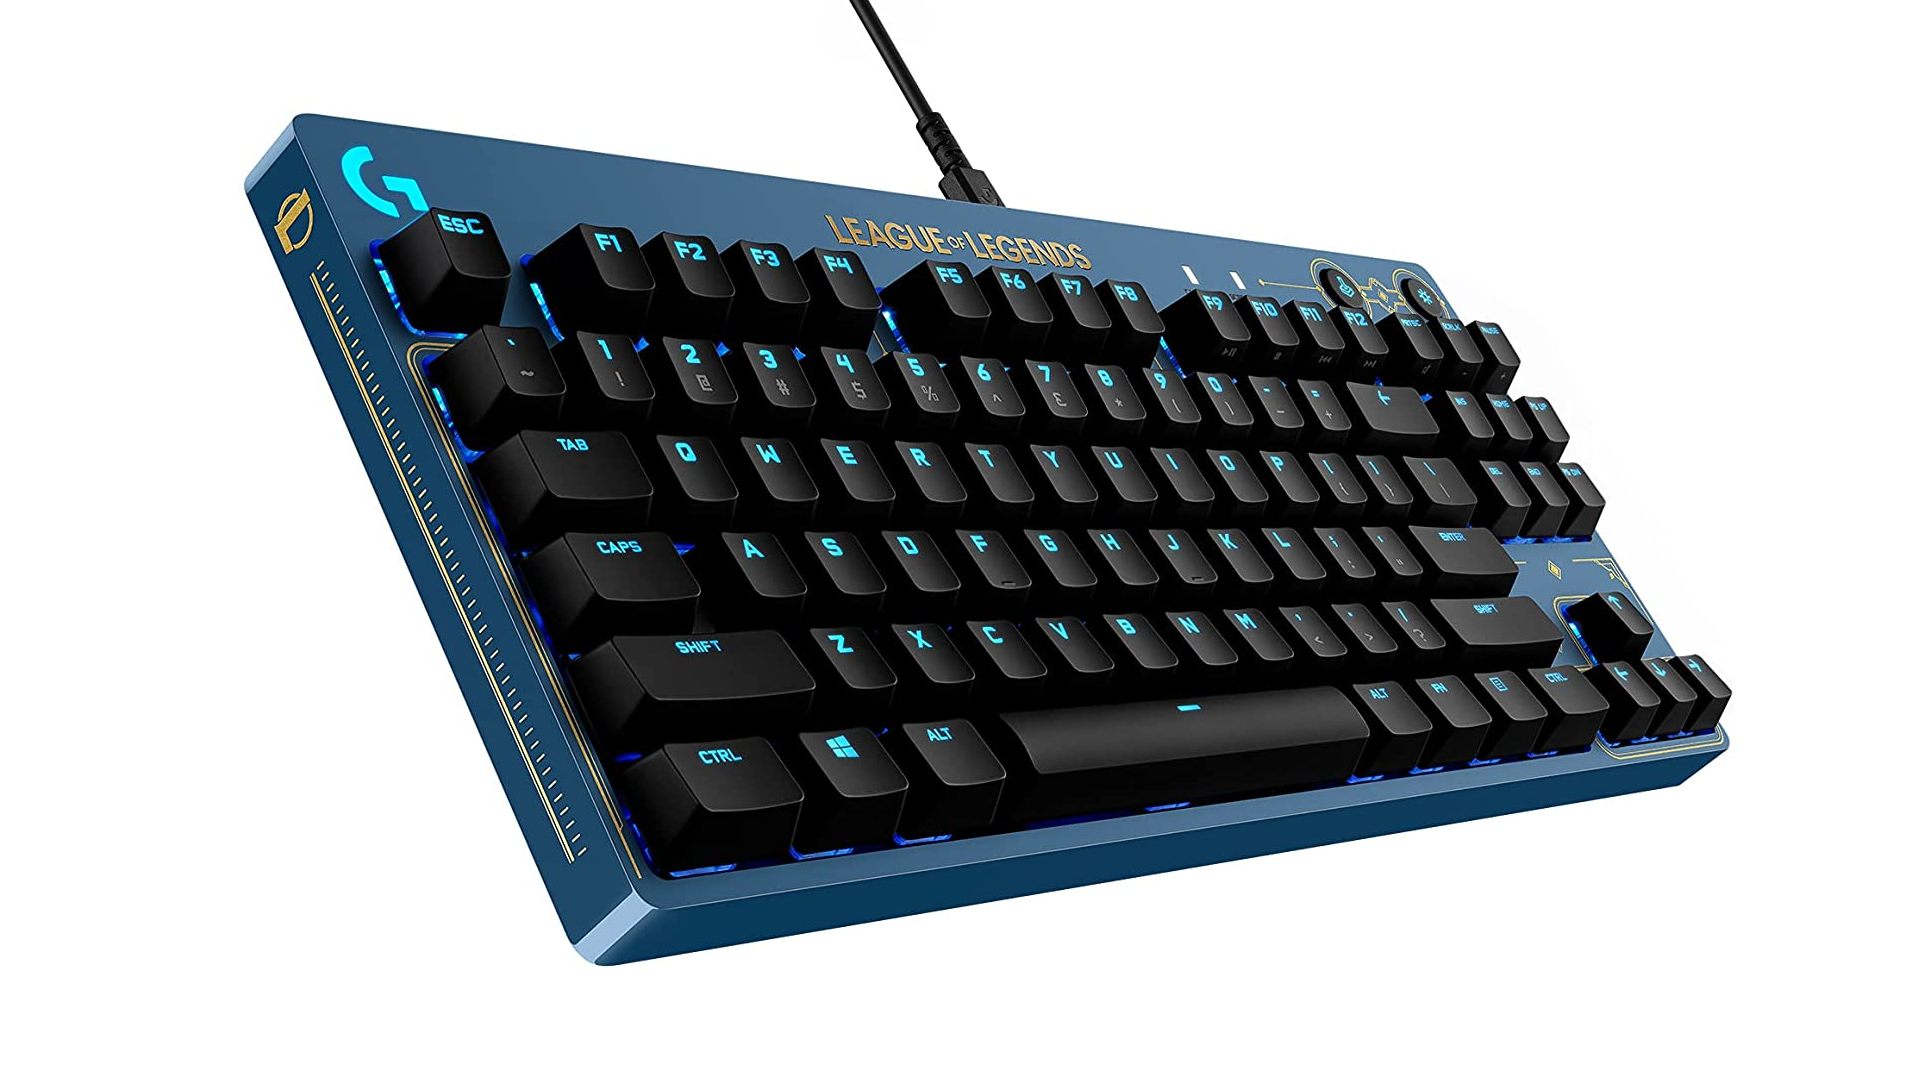 Get over 50% off this Logitech League of Legends keyboard – Gaming